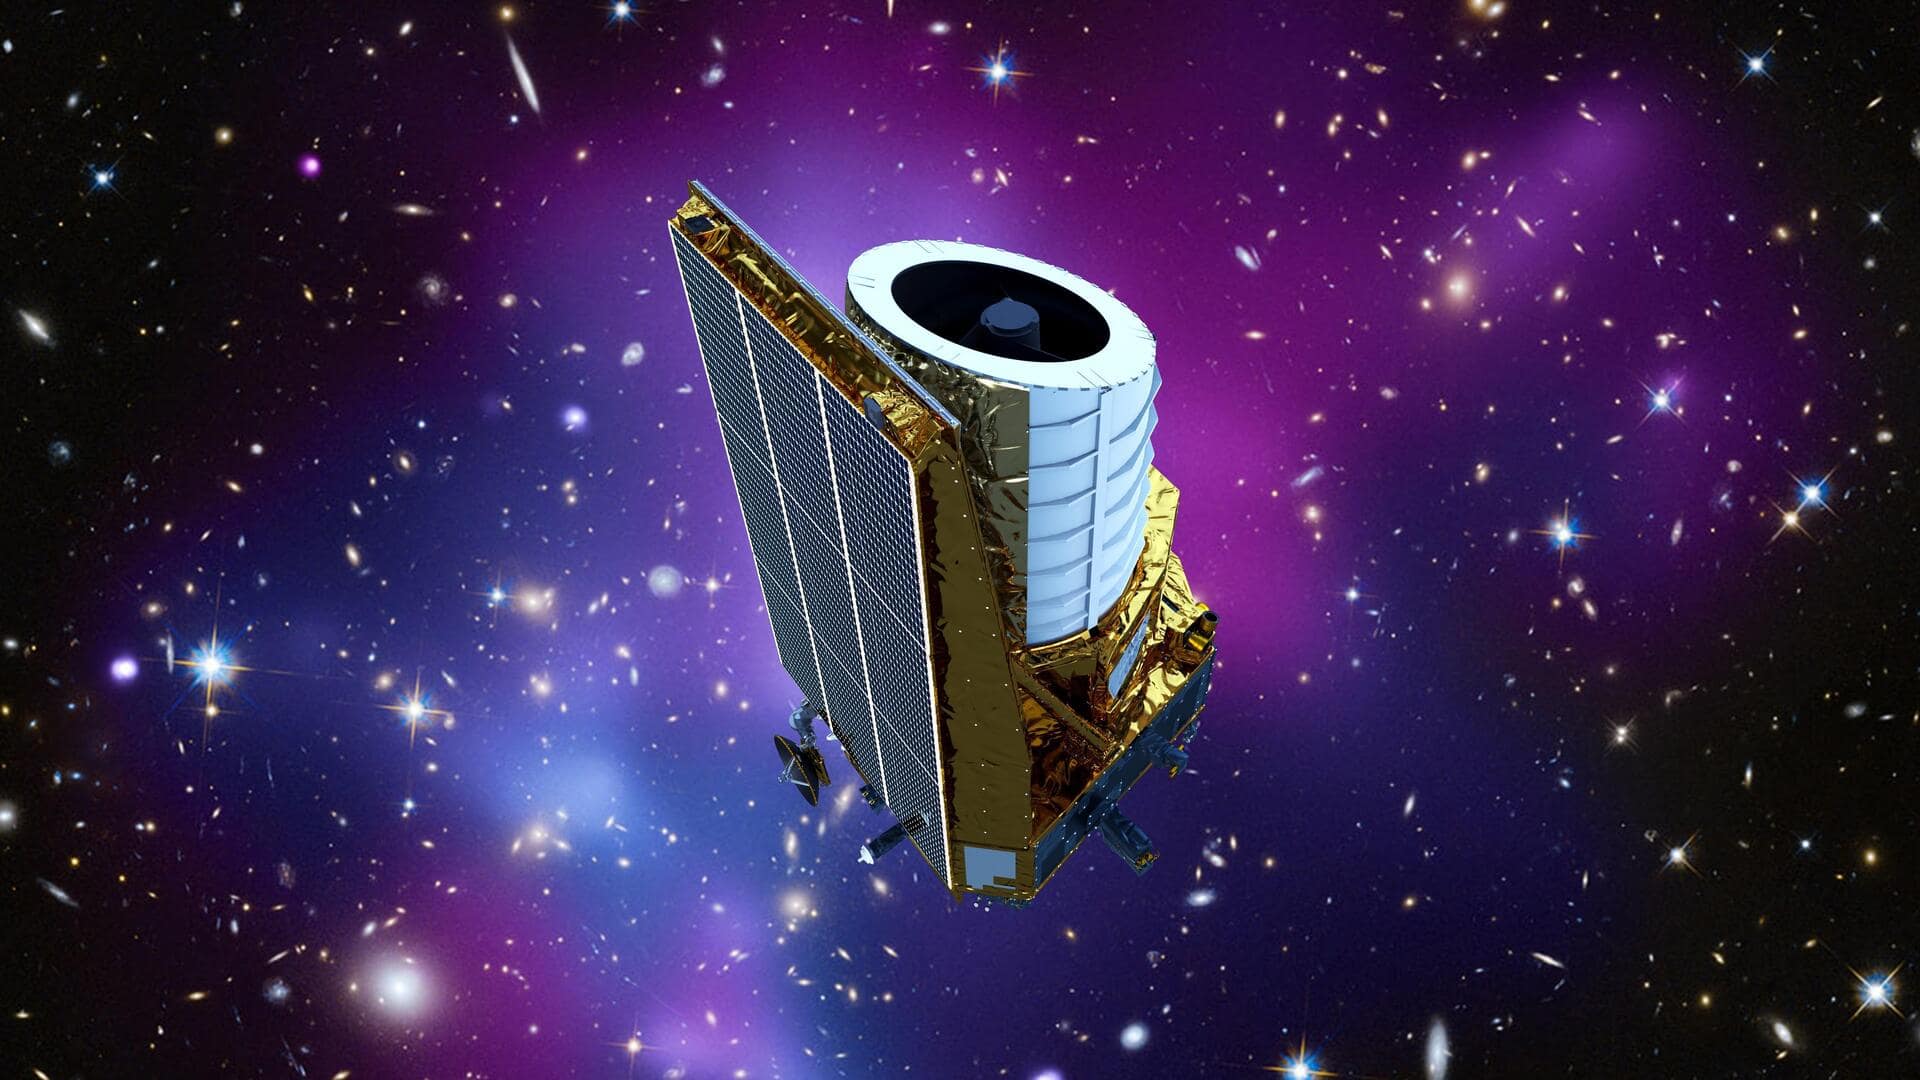 Everything about ESA's Euclid mission to launch on July 1